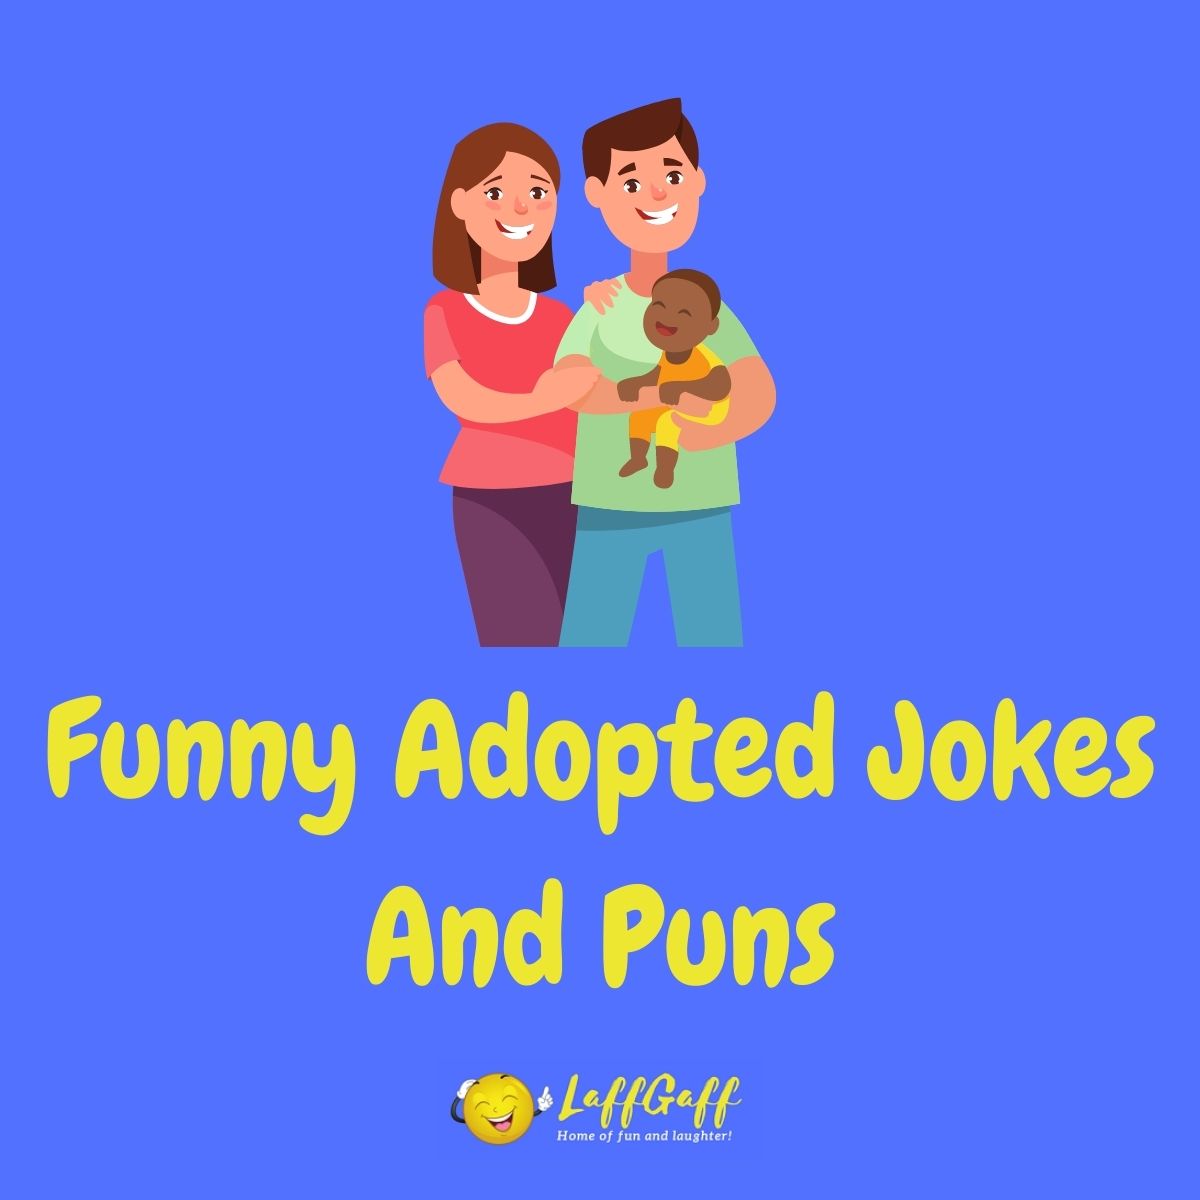 Featured image for a page of funny adopted jokes and puns.